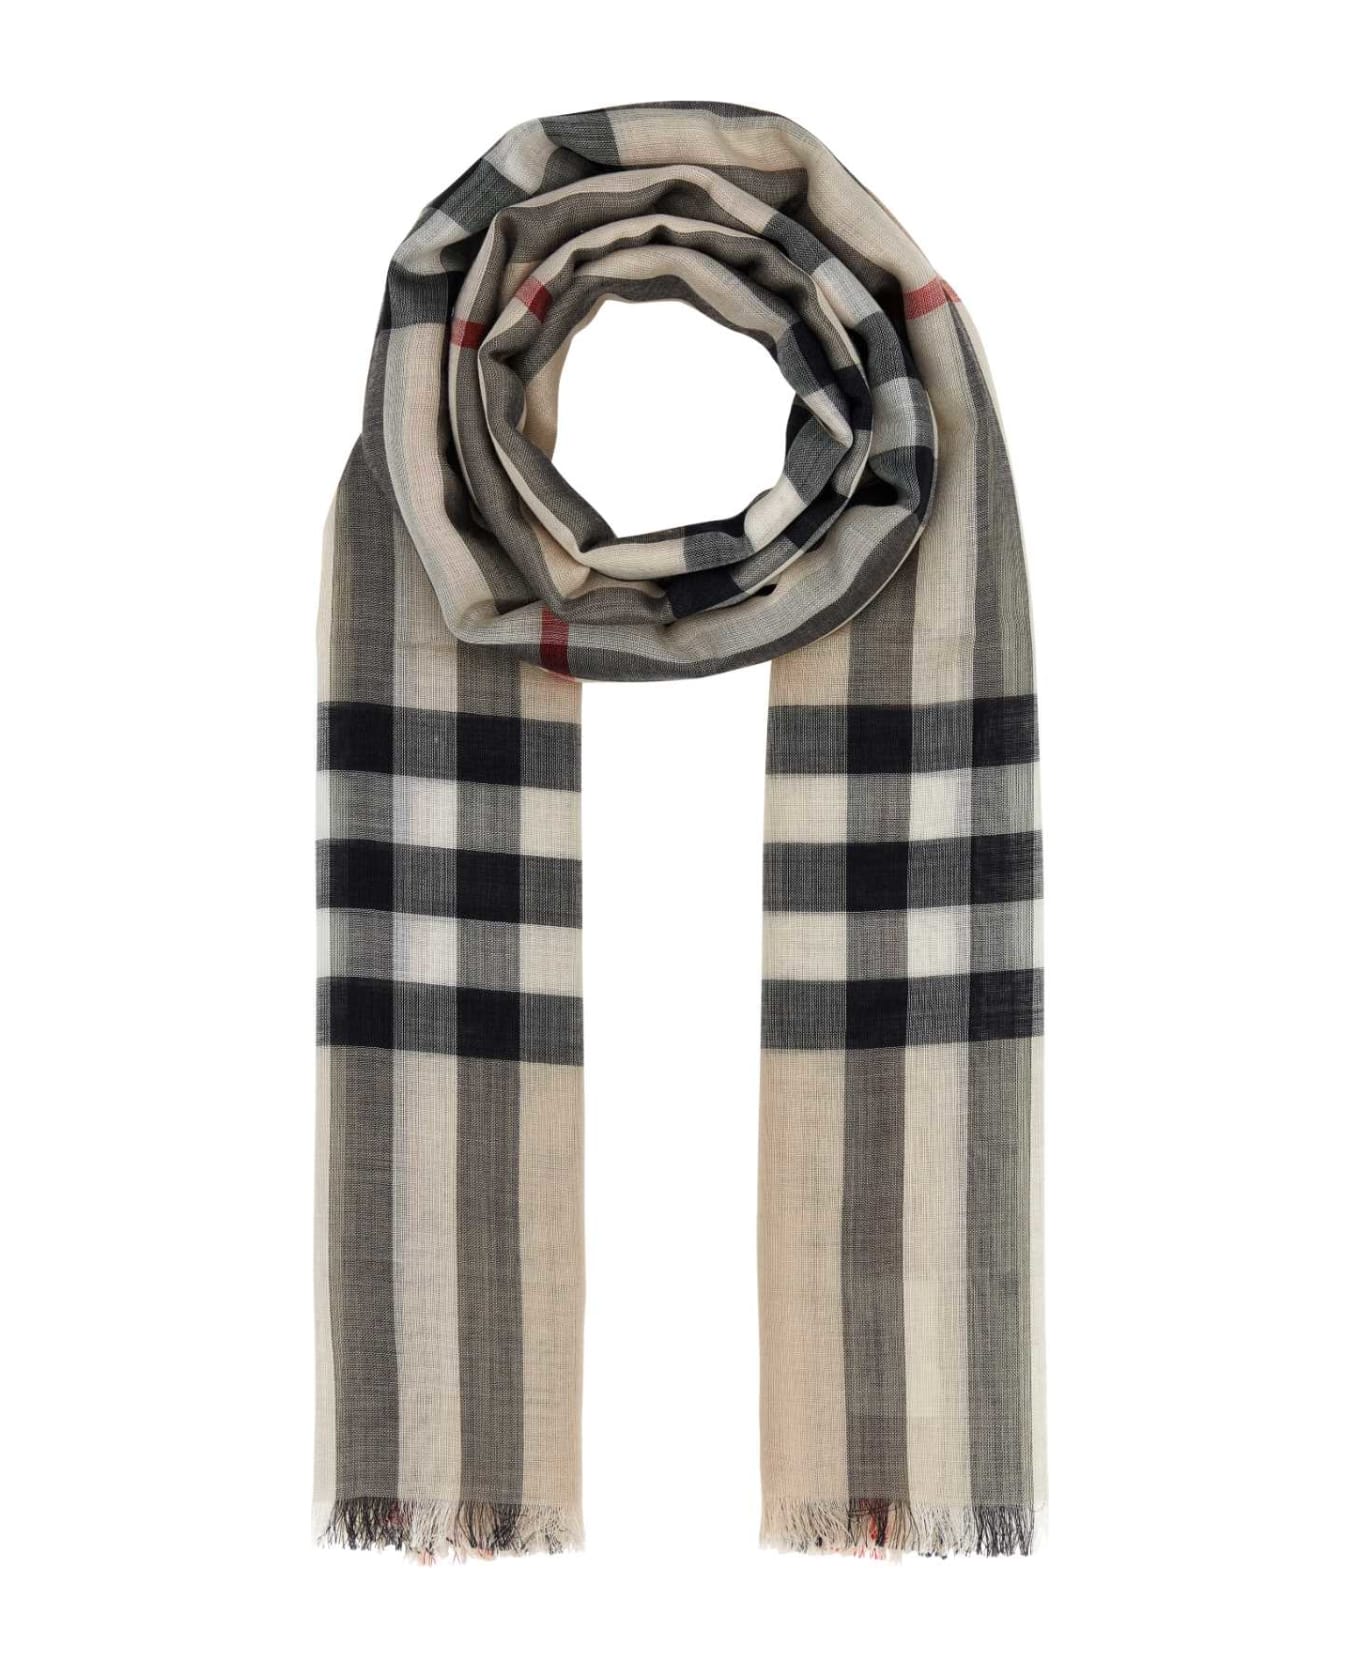 Burberry Embroidered Wool Blend Foulard - STONECHECK